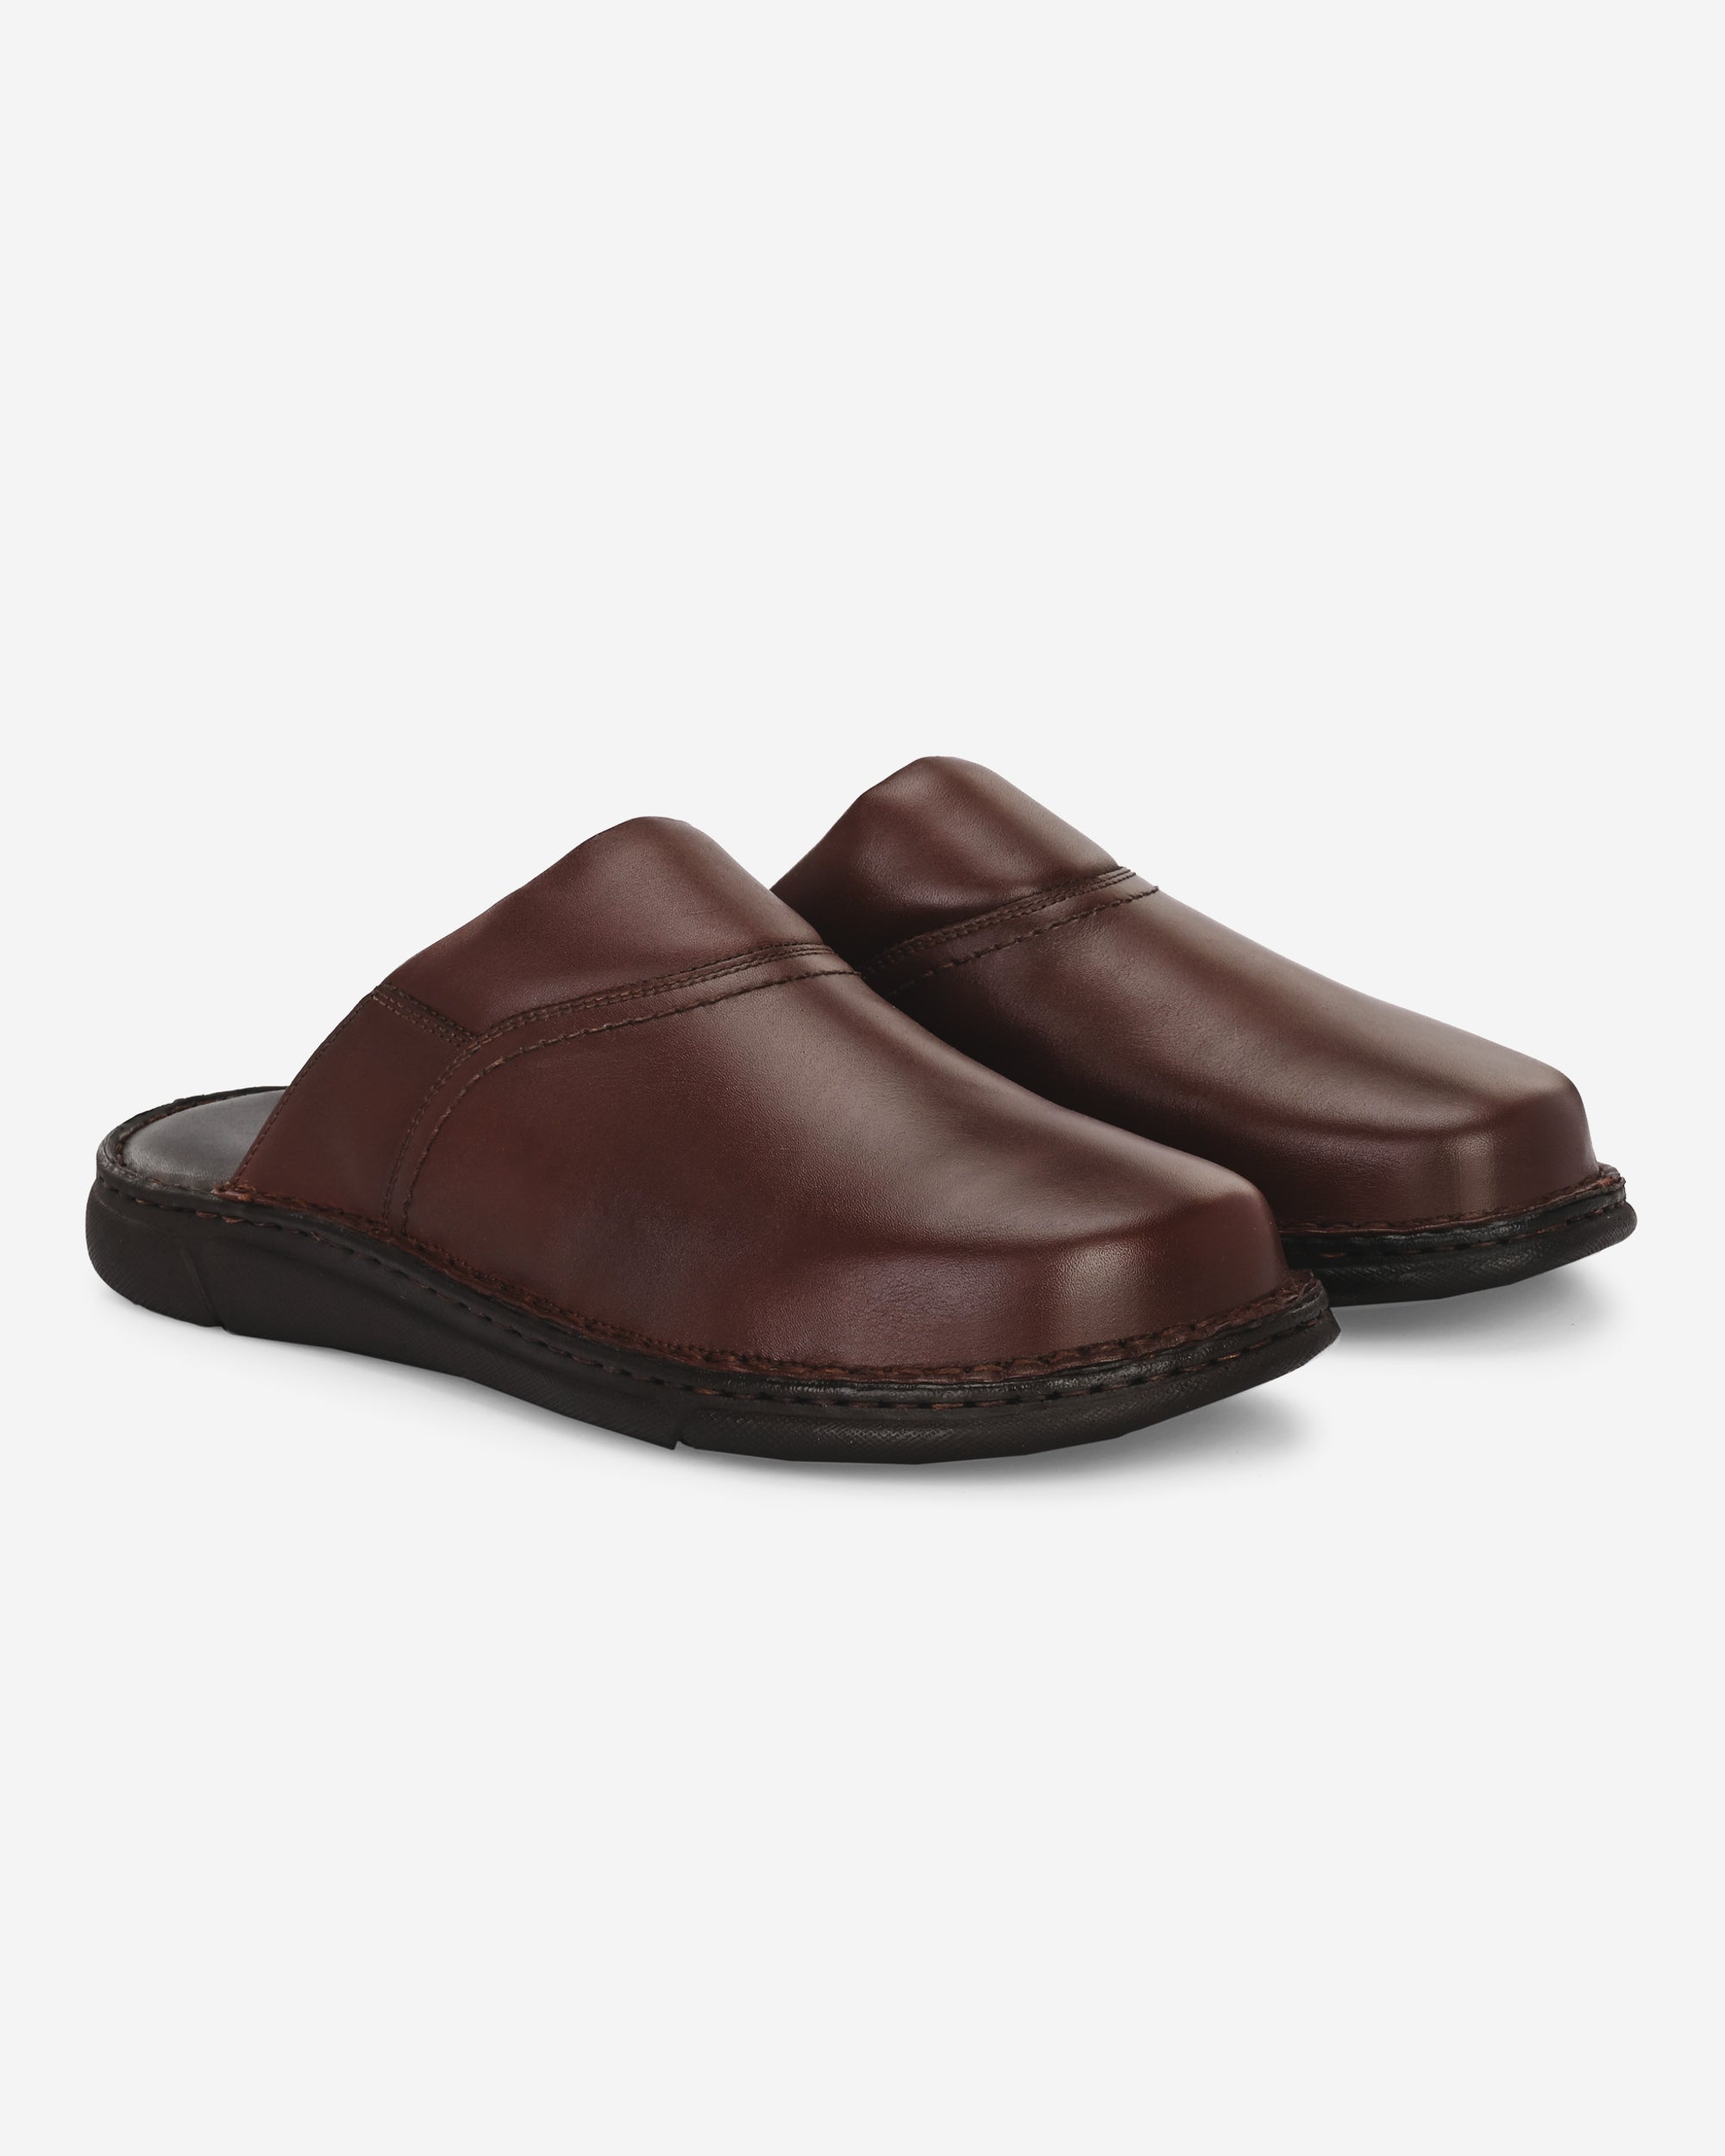 HARRY BROWN LOAFERS